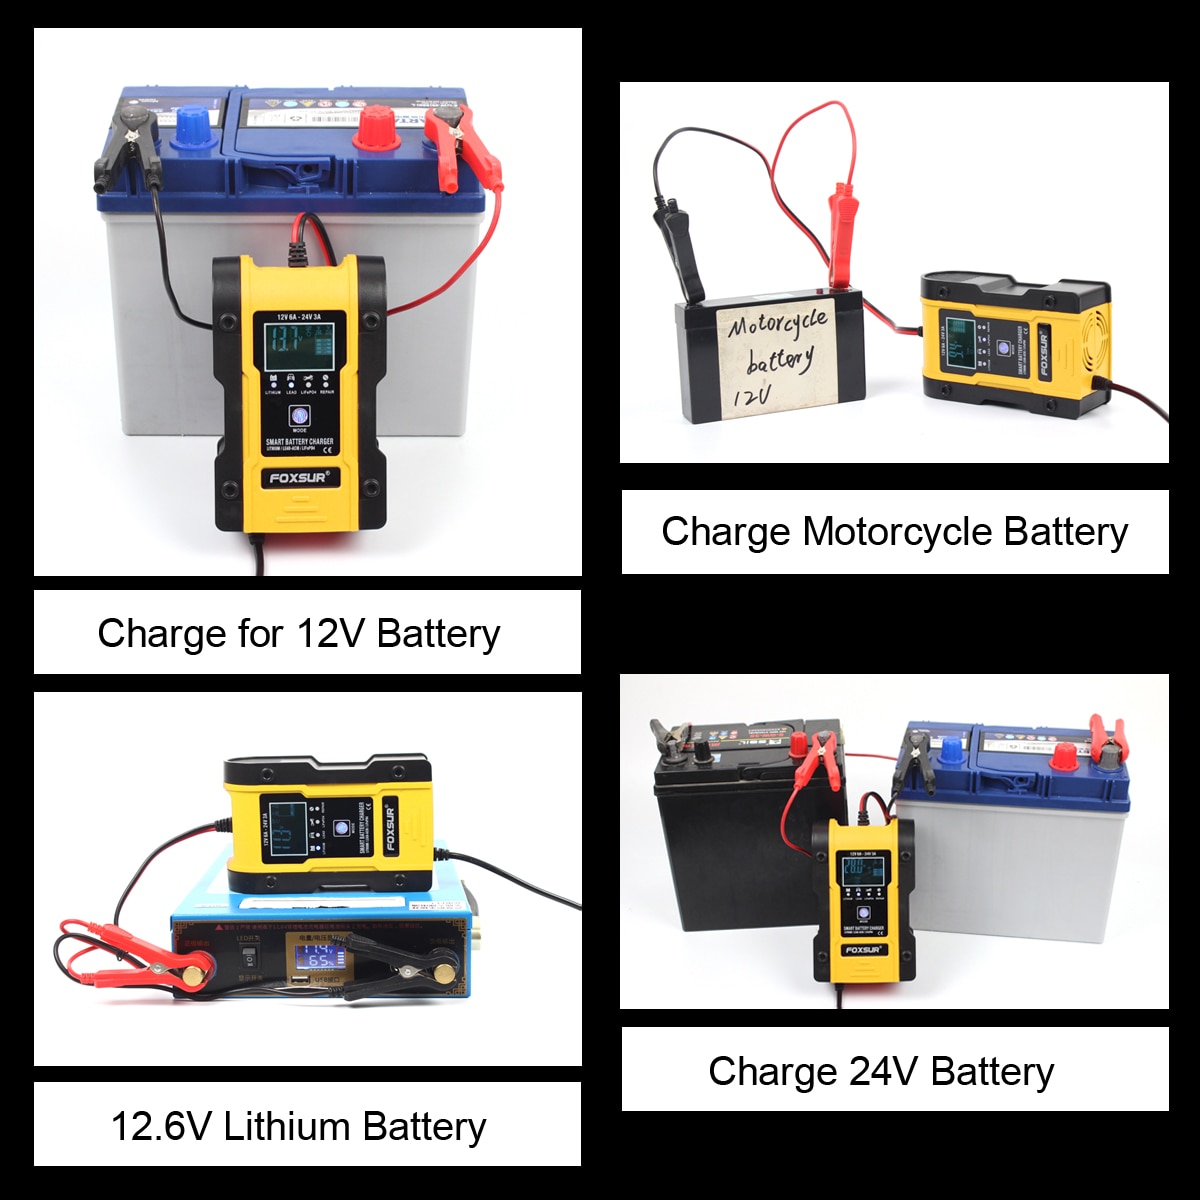 12V 24V Car Battery Charger, 6A 12.6V Lithium Battery Charger & Maintainer, 7-Stage Car & Motorcycle Battery Charger